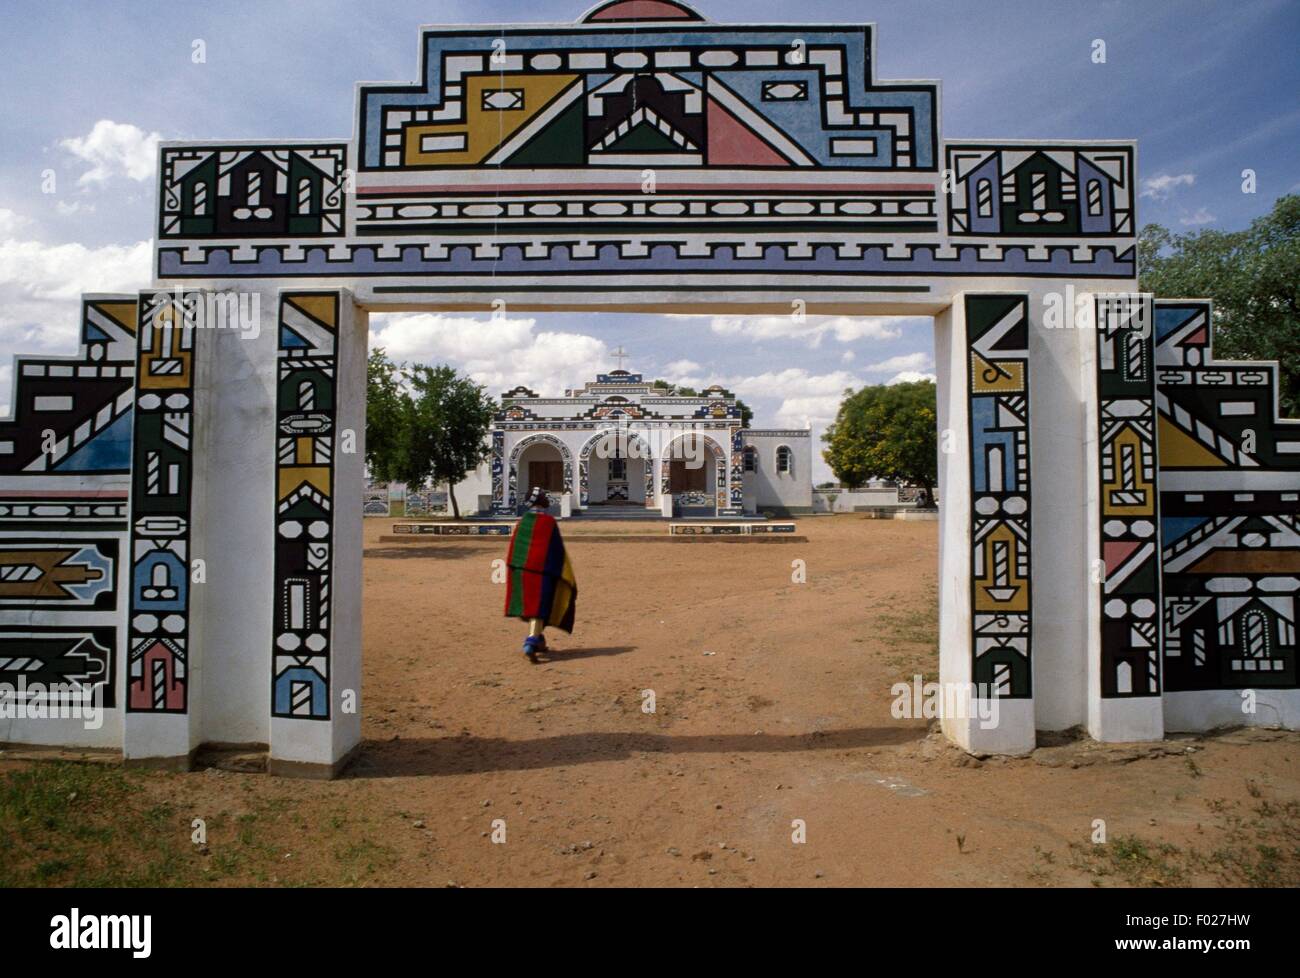 Entrance to a Ndebele village, South Africa. Stock Photo